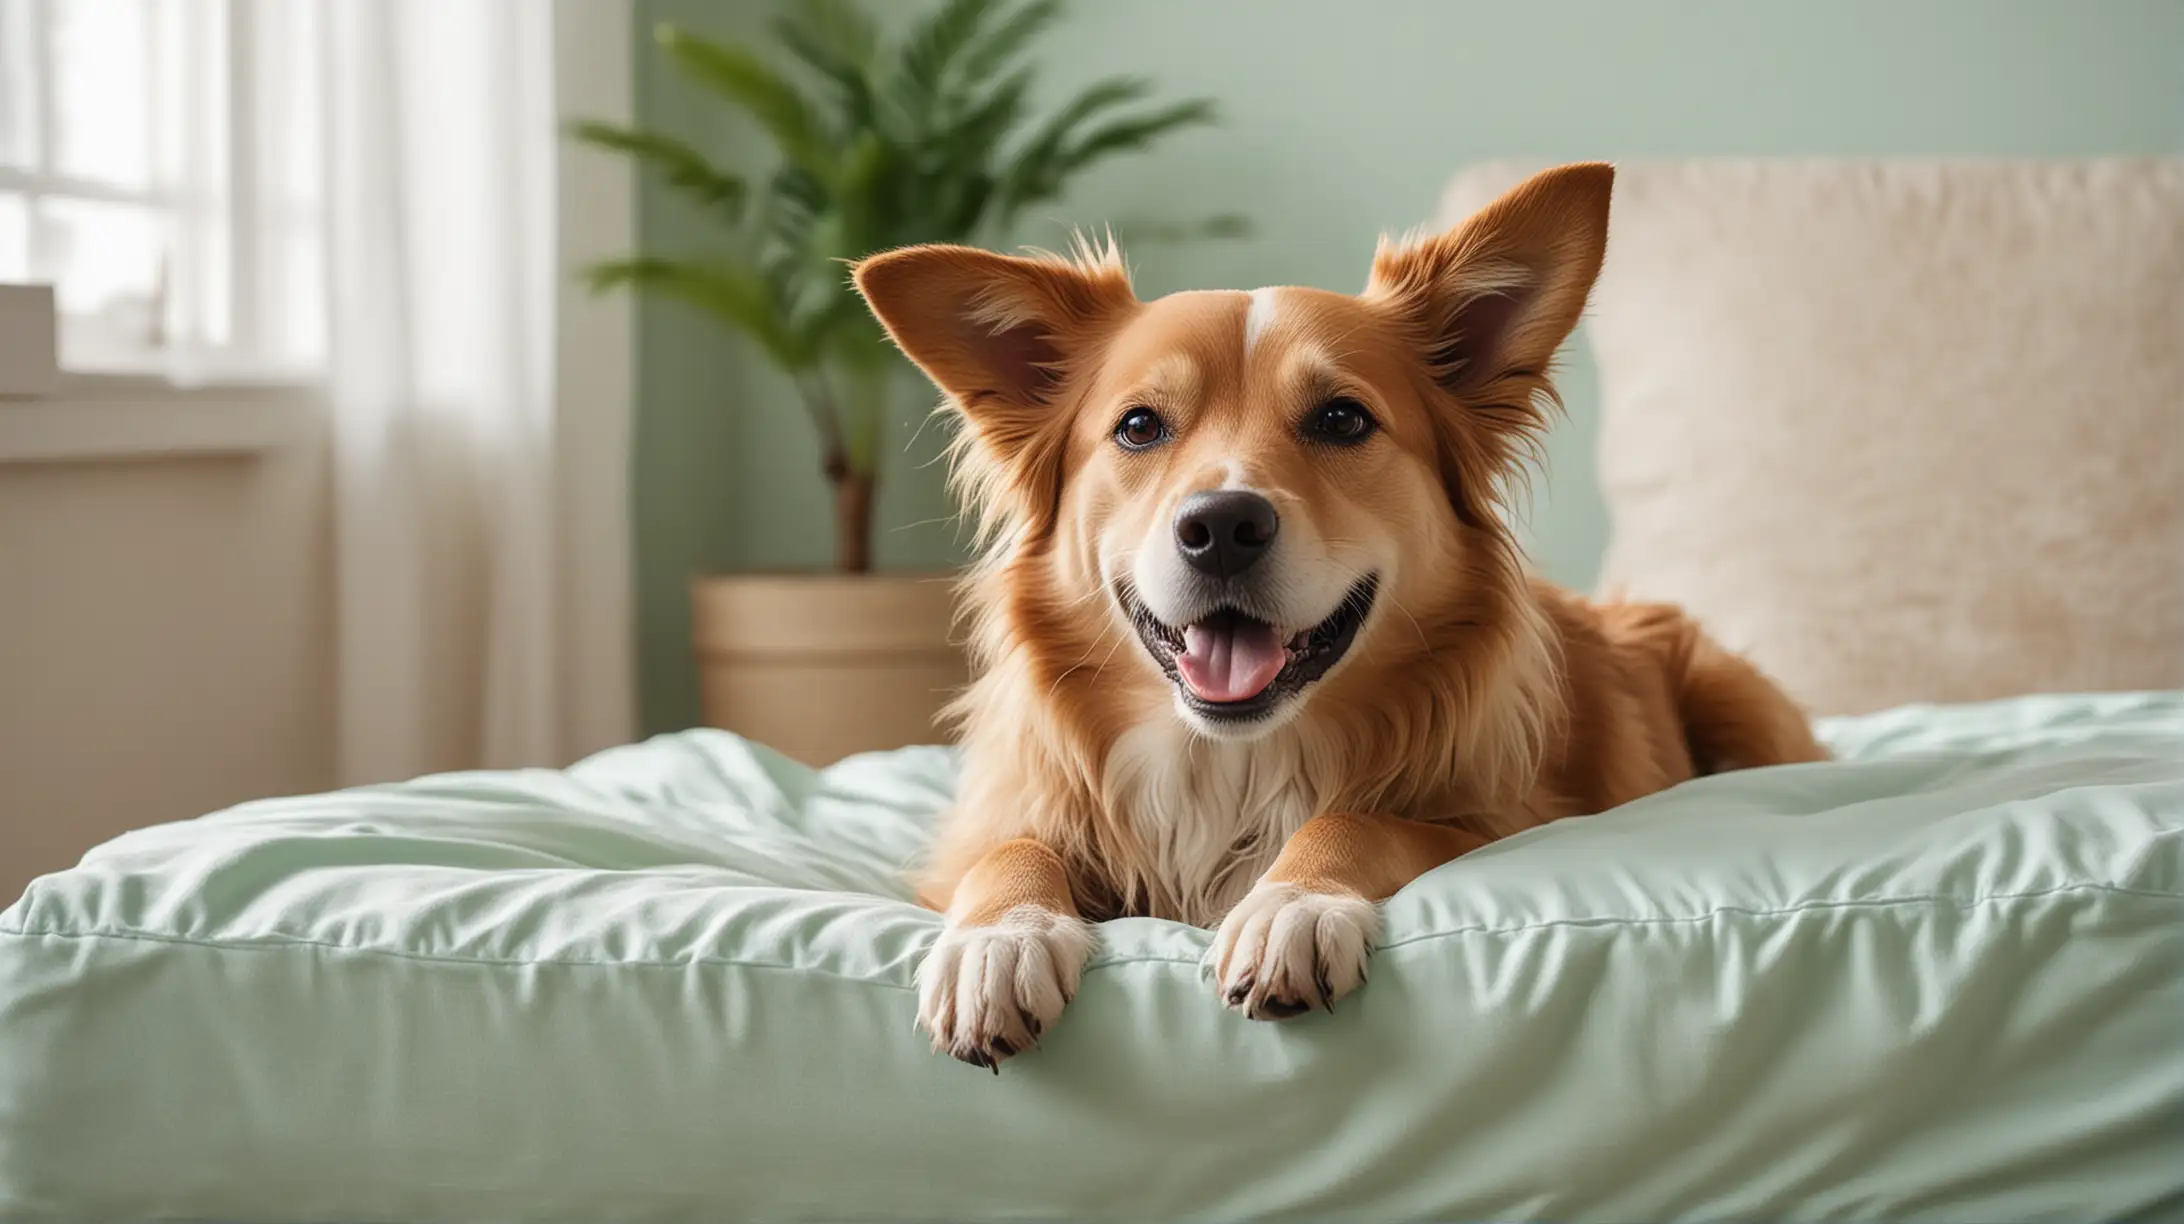 Happy Dog Relaxing on Orthopedic Bed in Luxurious Home Setting